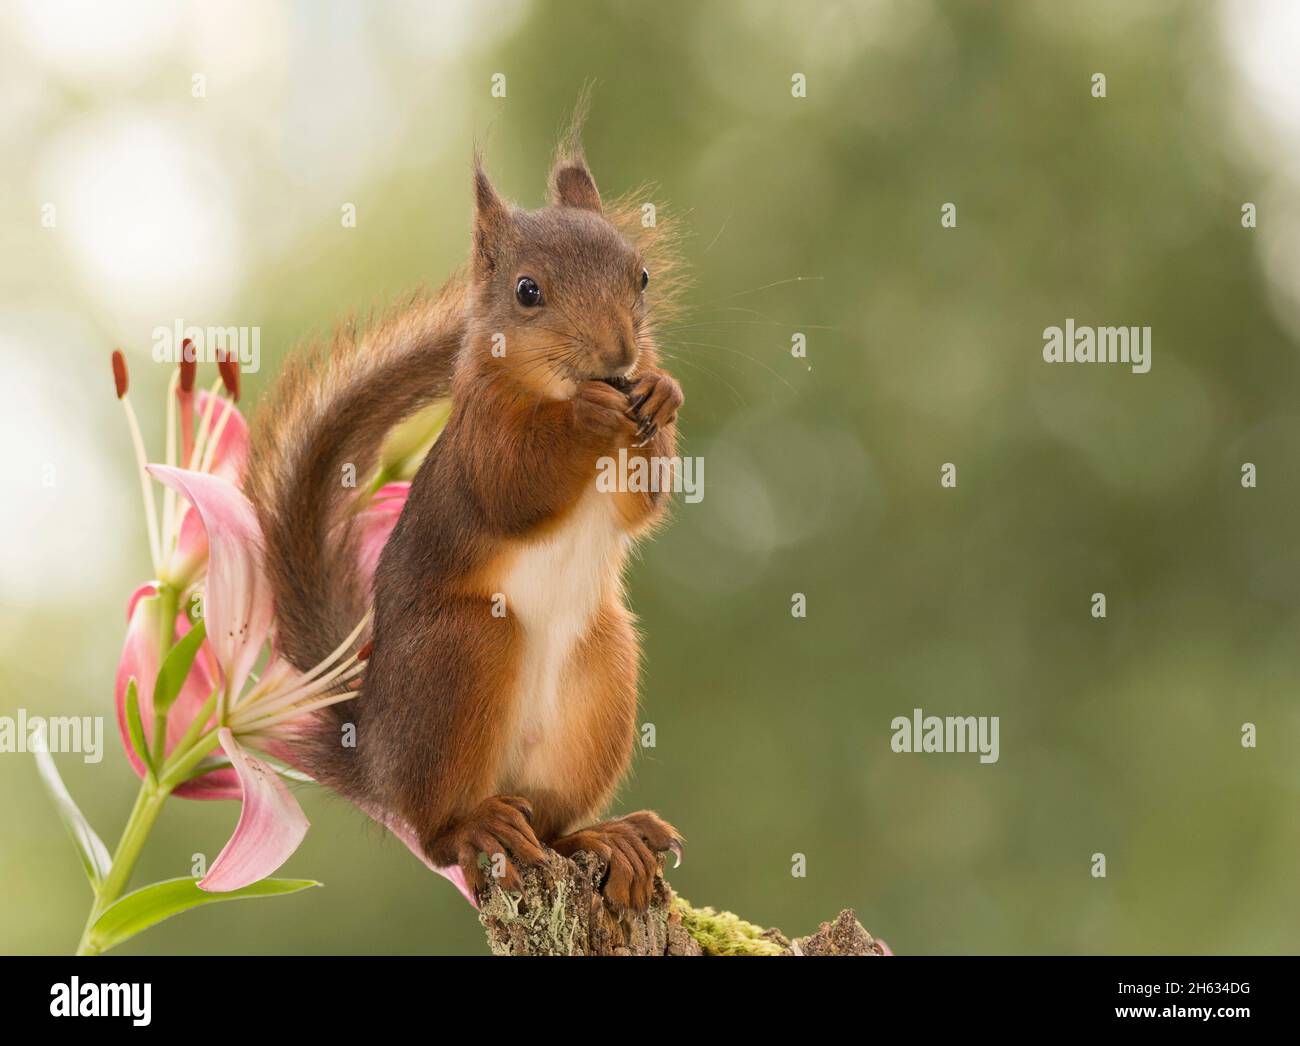 close up of red squirrel standing on tree trunk with a lily behind Stock Photo